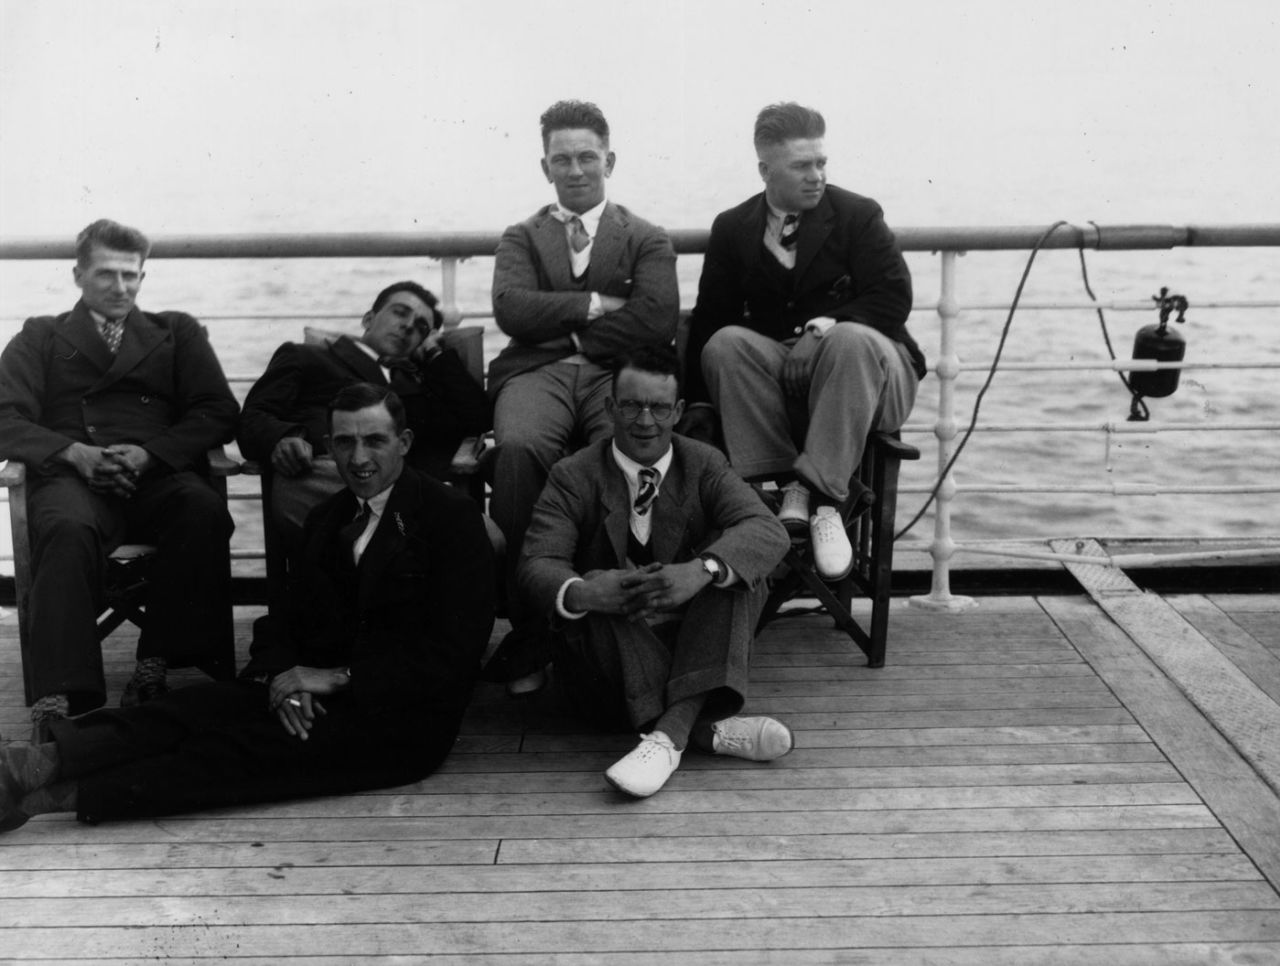 England players on board the <i>Orontes</i> travelling to Australia, September 28, 1932